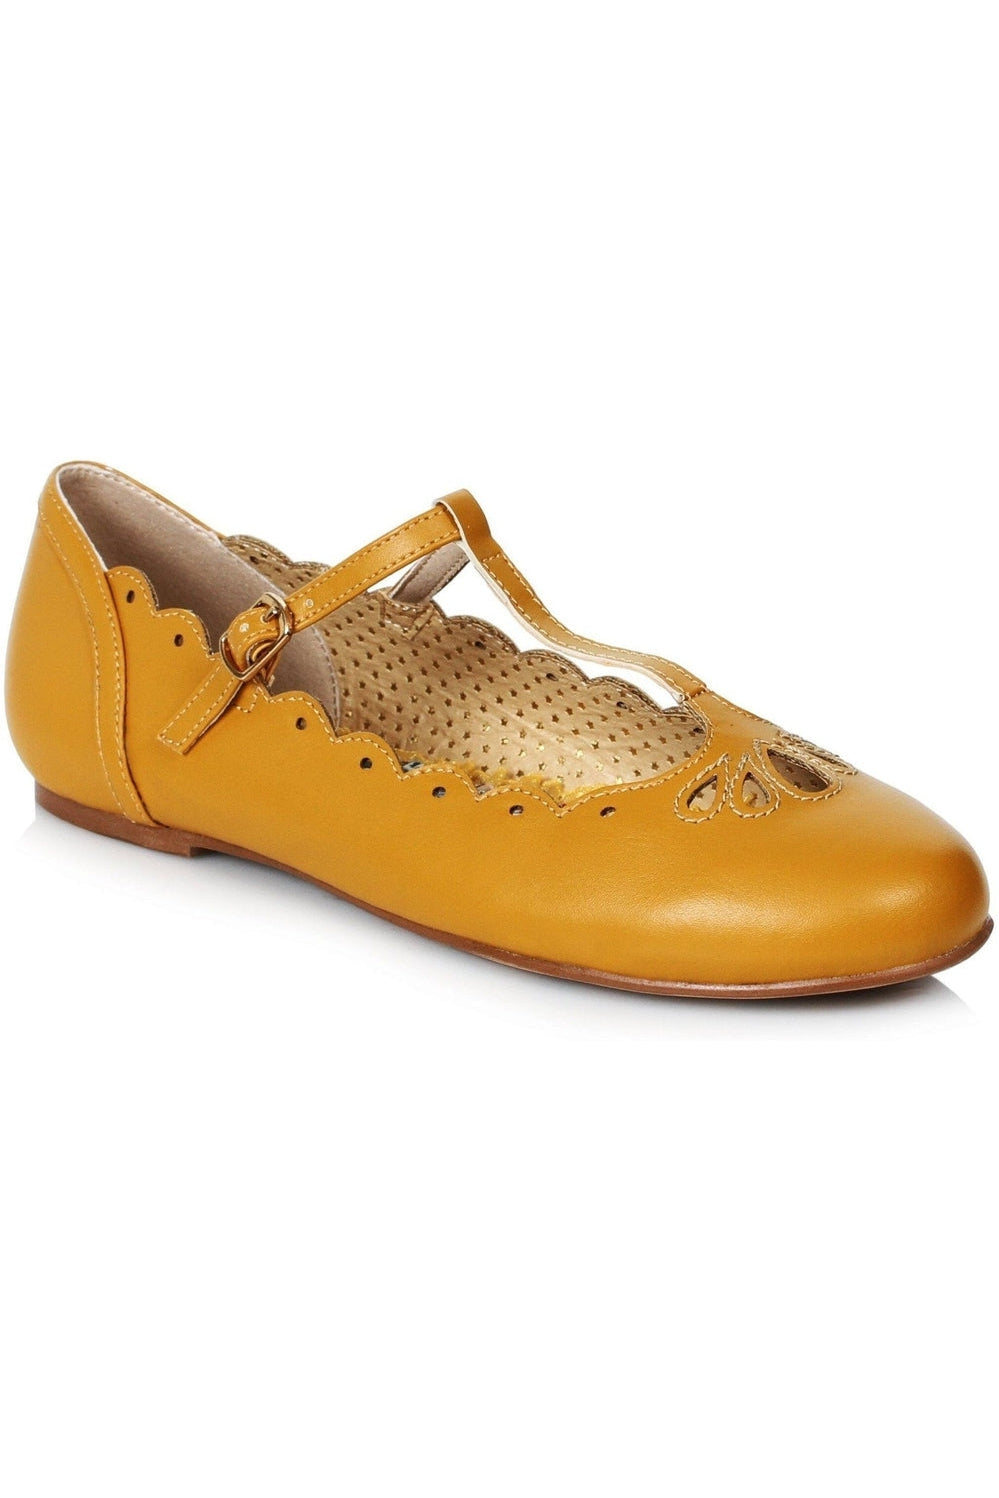 Bettie Paige Maila Vintage Flat | Yellow Faux Leather-Bettie Page by Ellie-SEXYSHOES.COM